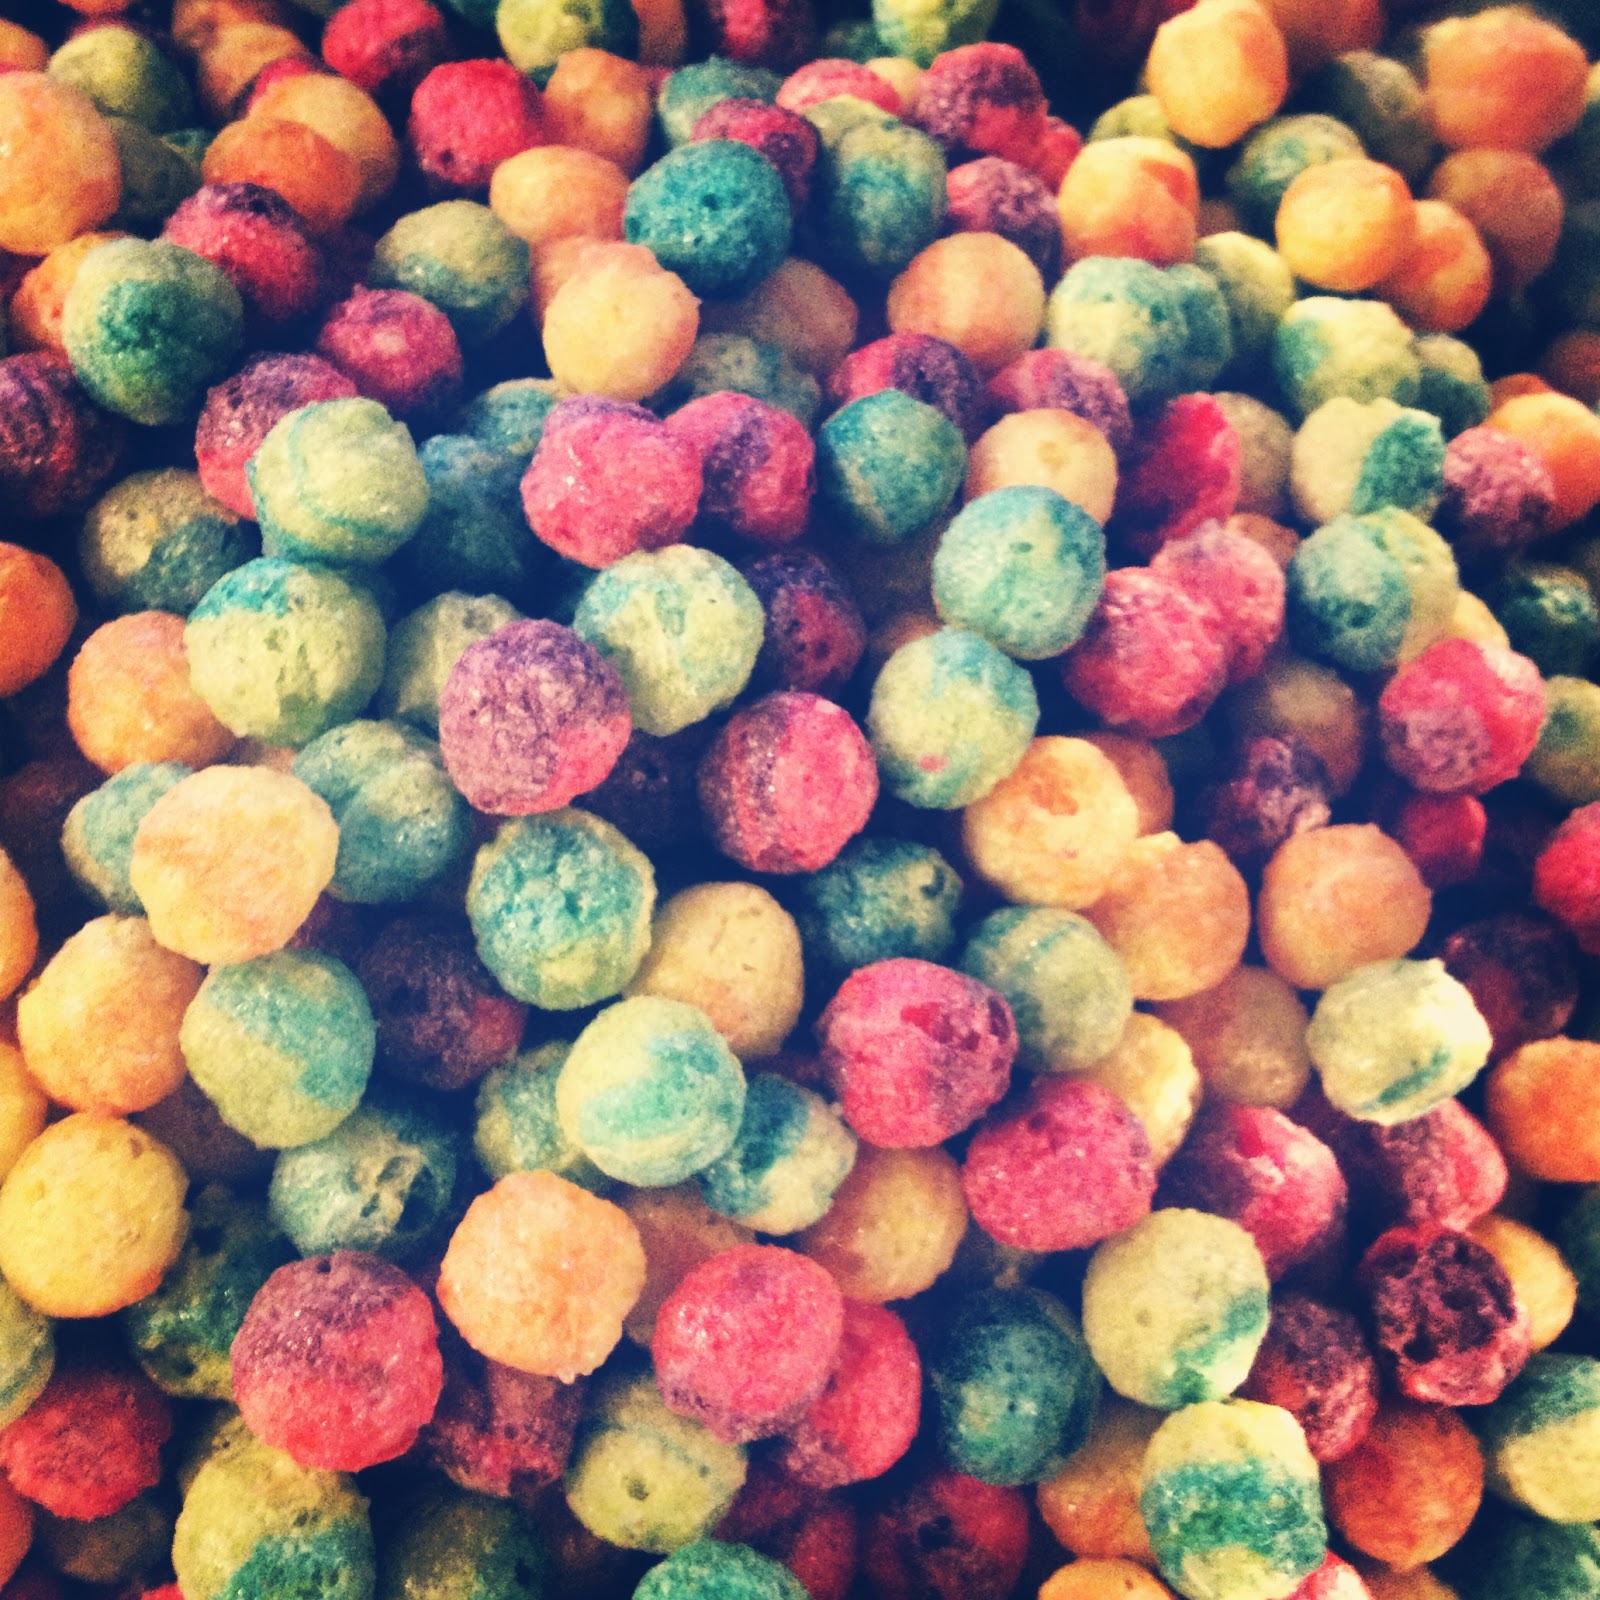 Sugar Swings! Serve Some: Trix and Chex Cereal Treats